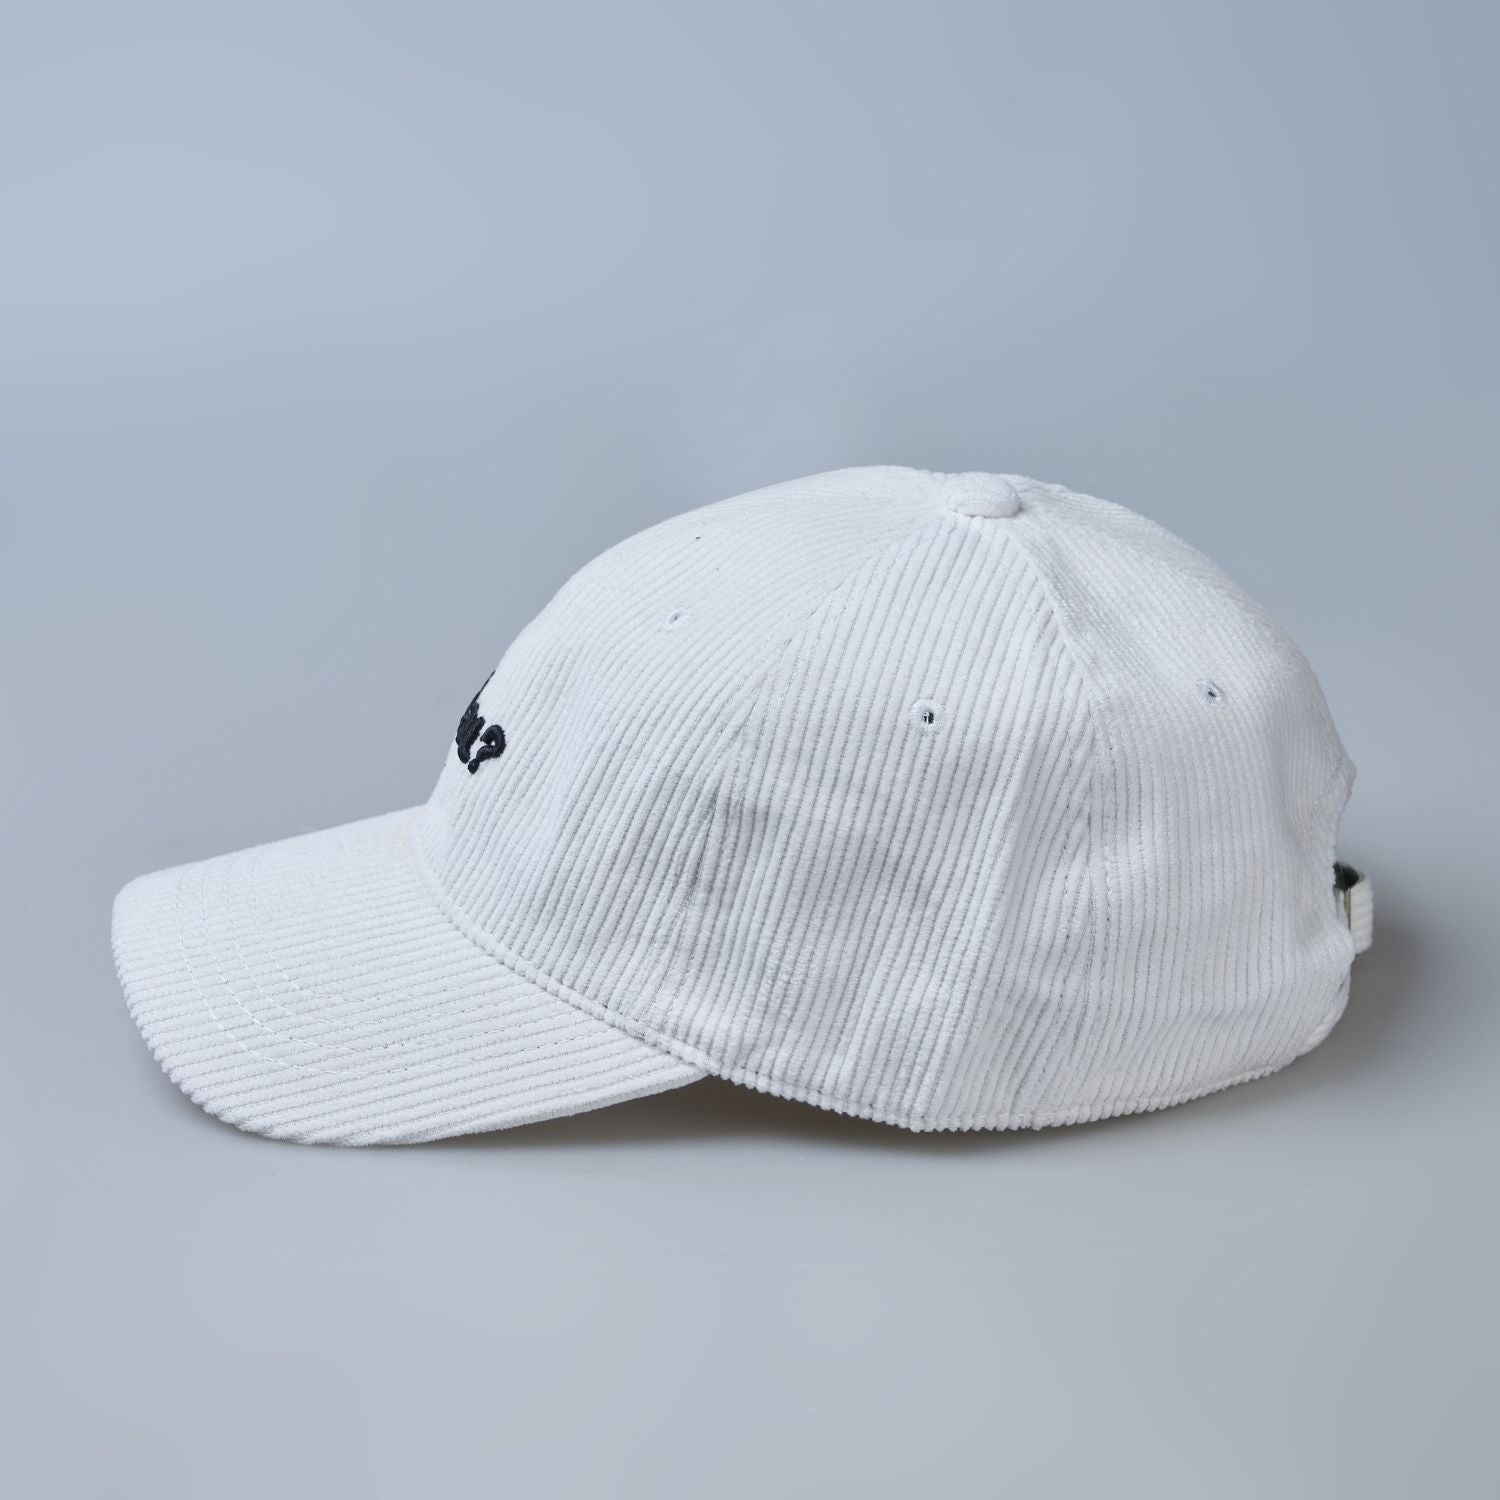 White colored cap for men with 'what' text written on it, side view.